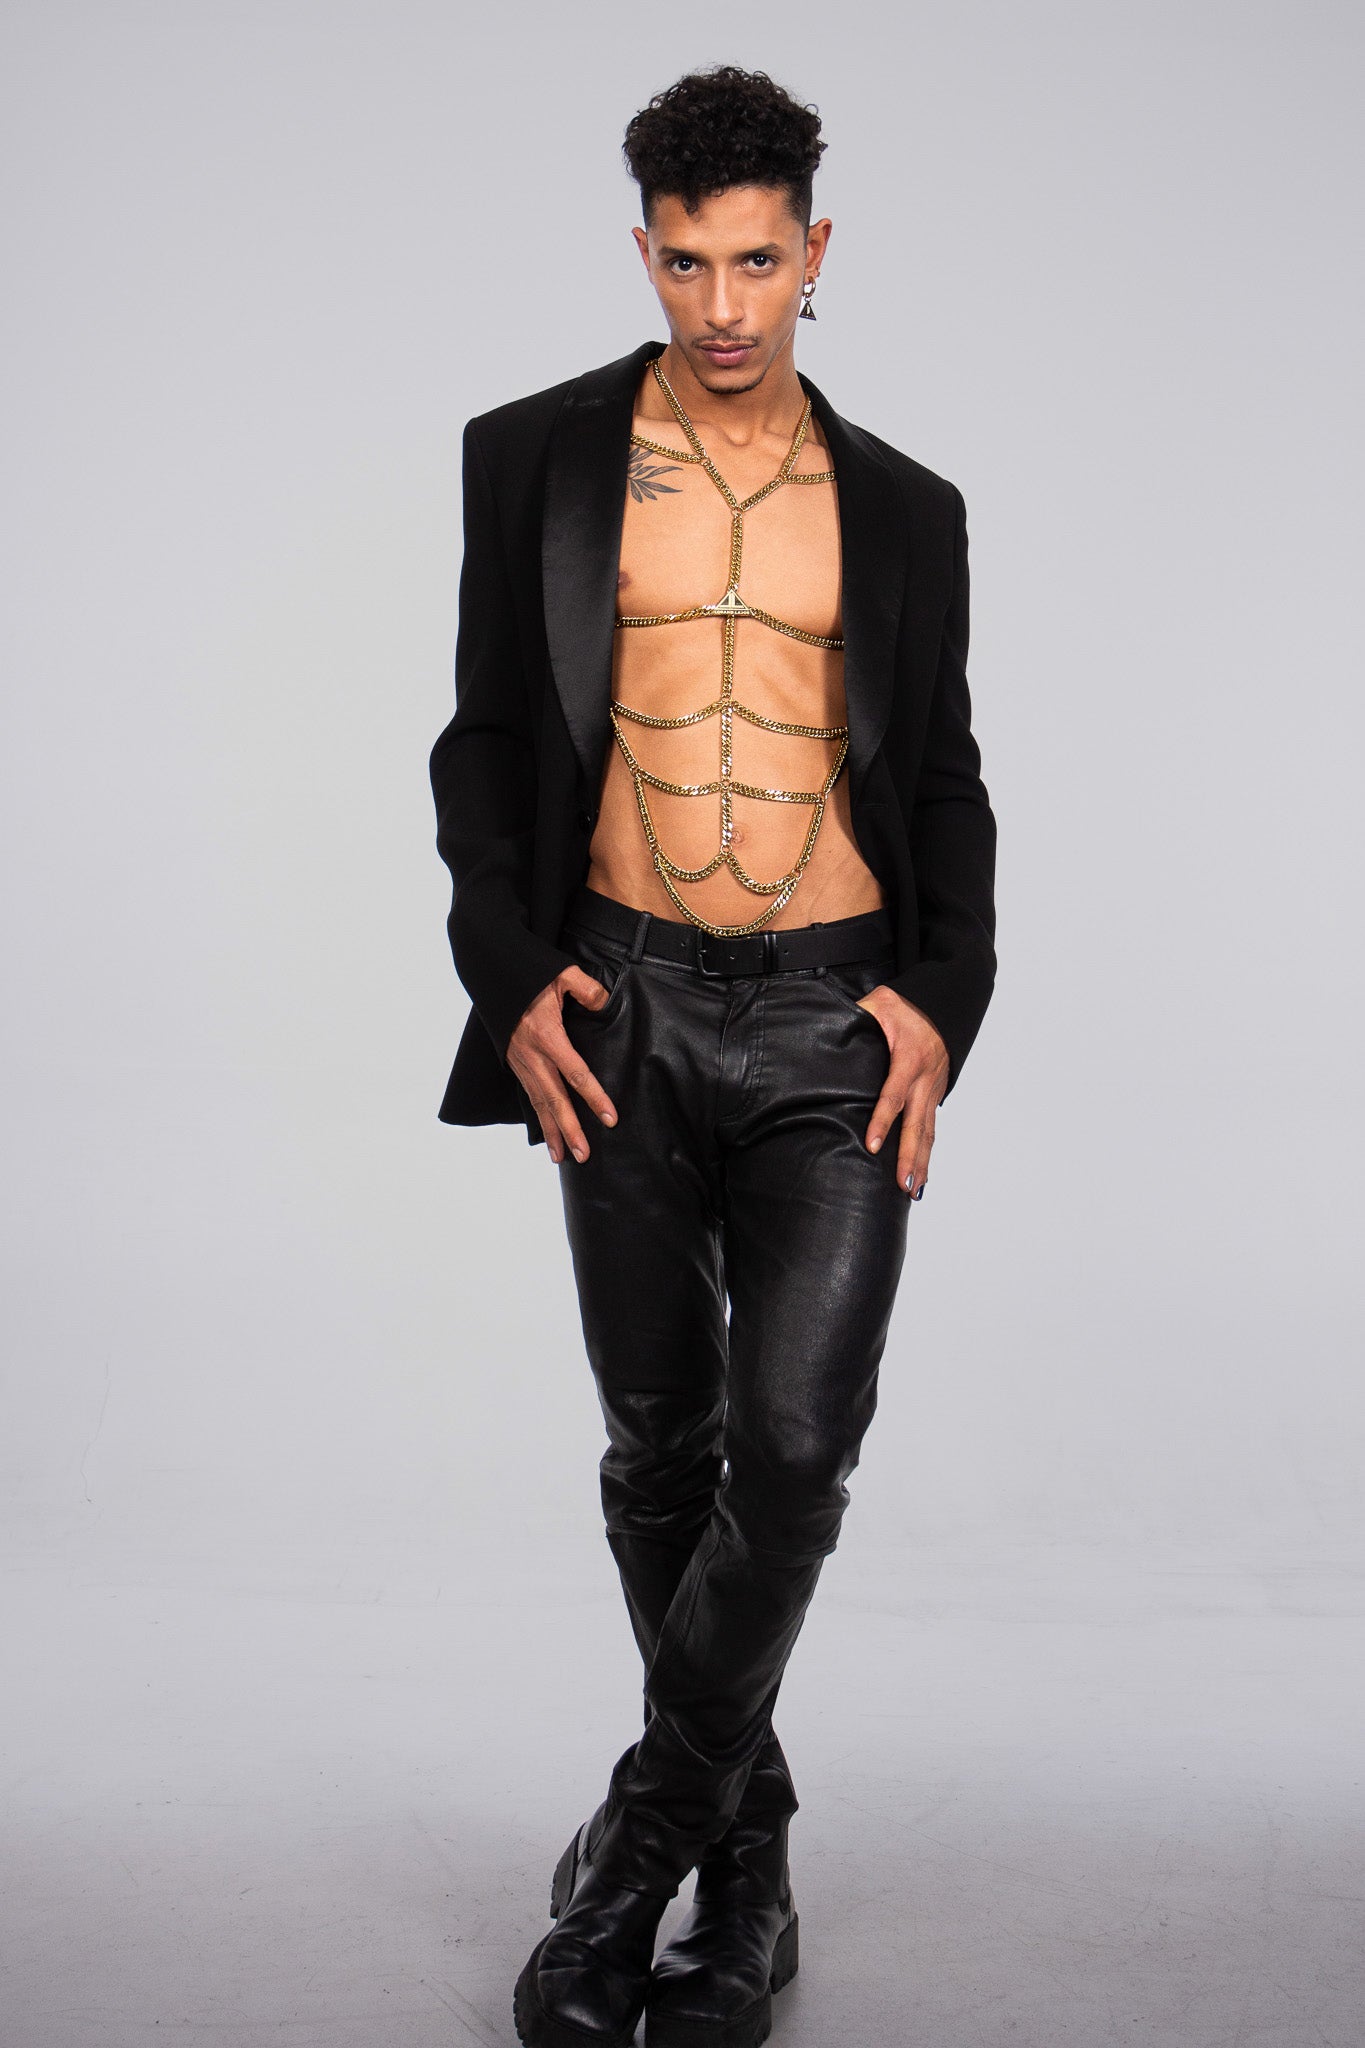 the product picture shows a muscular, gay young man wearing a sparkly golden body chain. his apps are highlighted by the accessory. He is also wearing an elegant dinner jacket. The Logo paquette shows Lorand Lajos